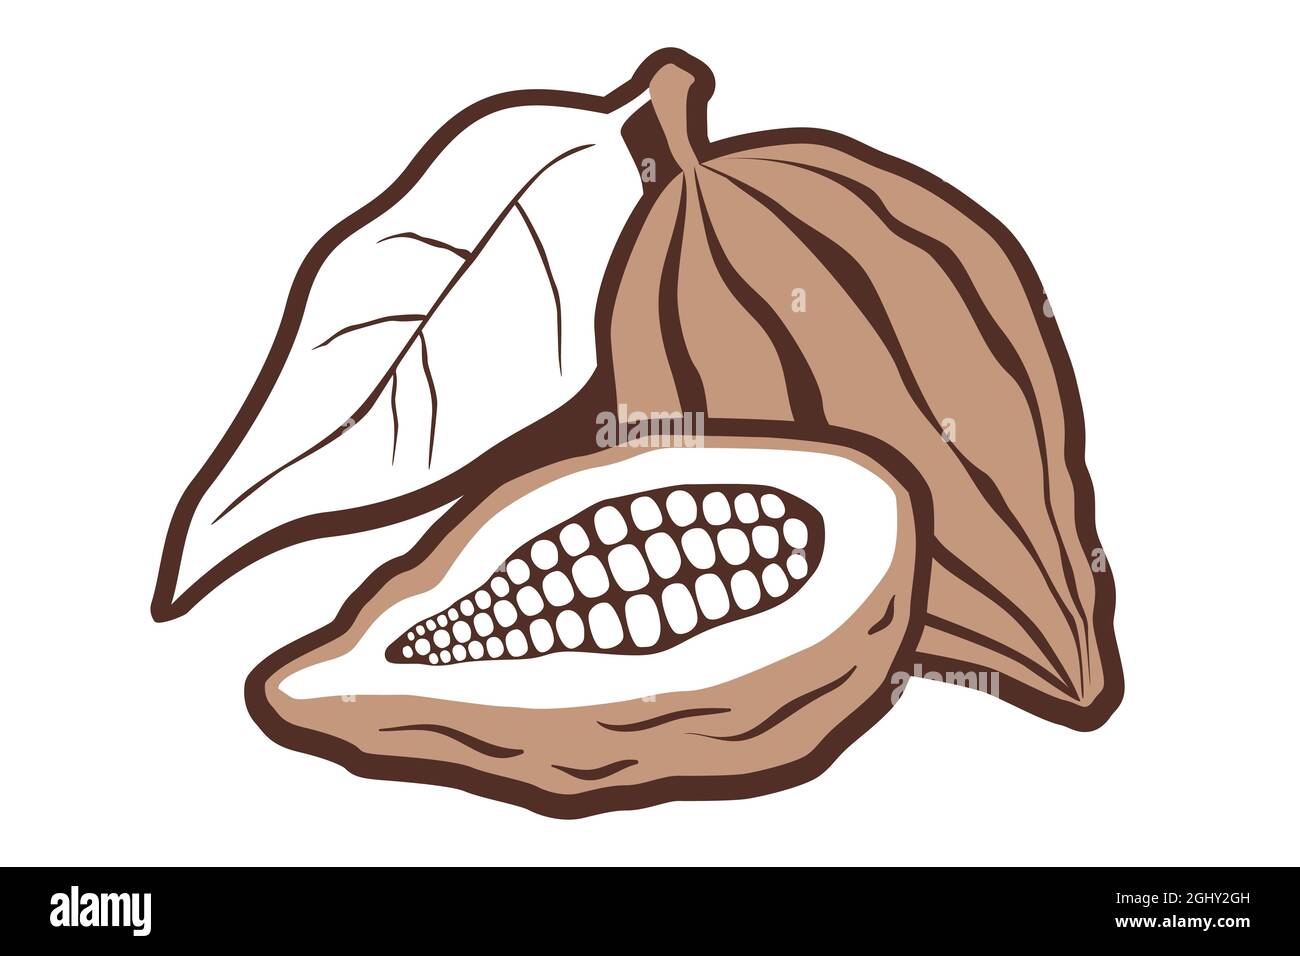 Vector vintage logo with cocoa on isolated background. Vector icon of cocoa bean. Stock Vector